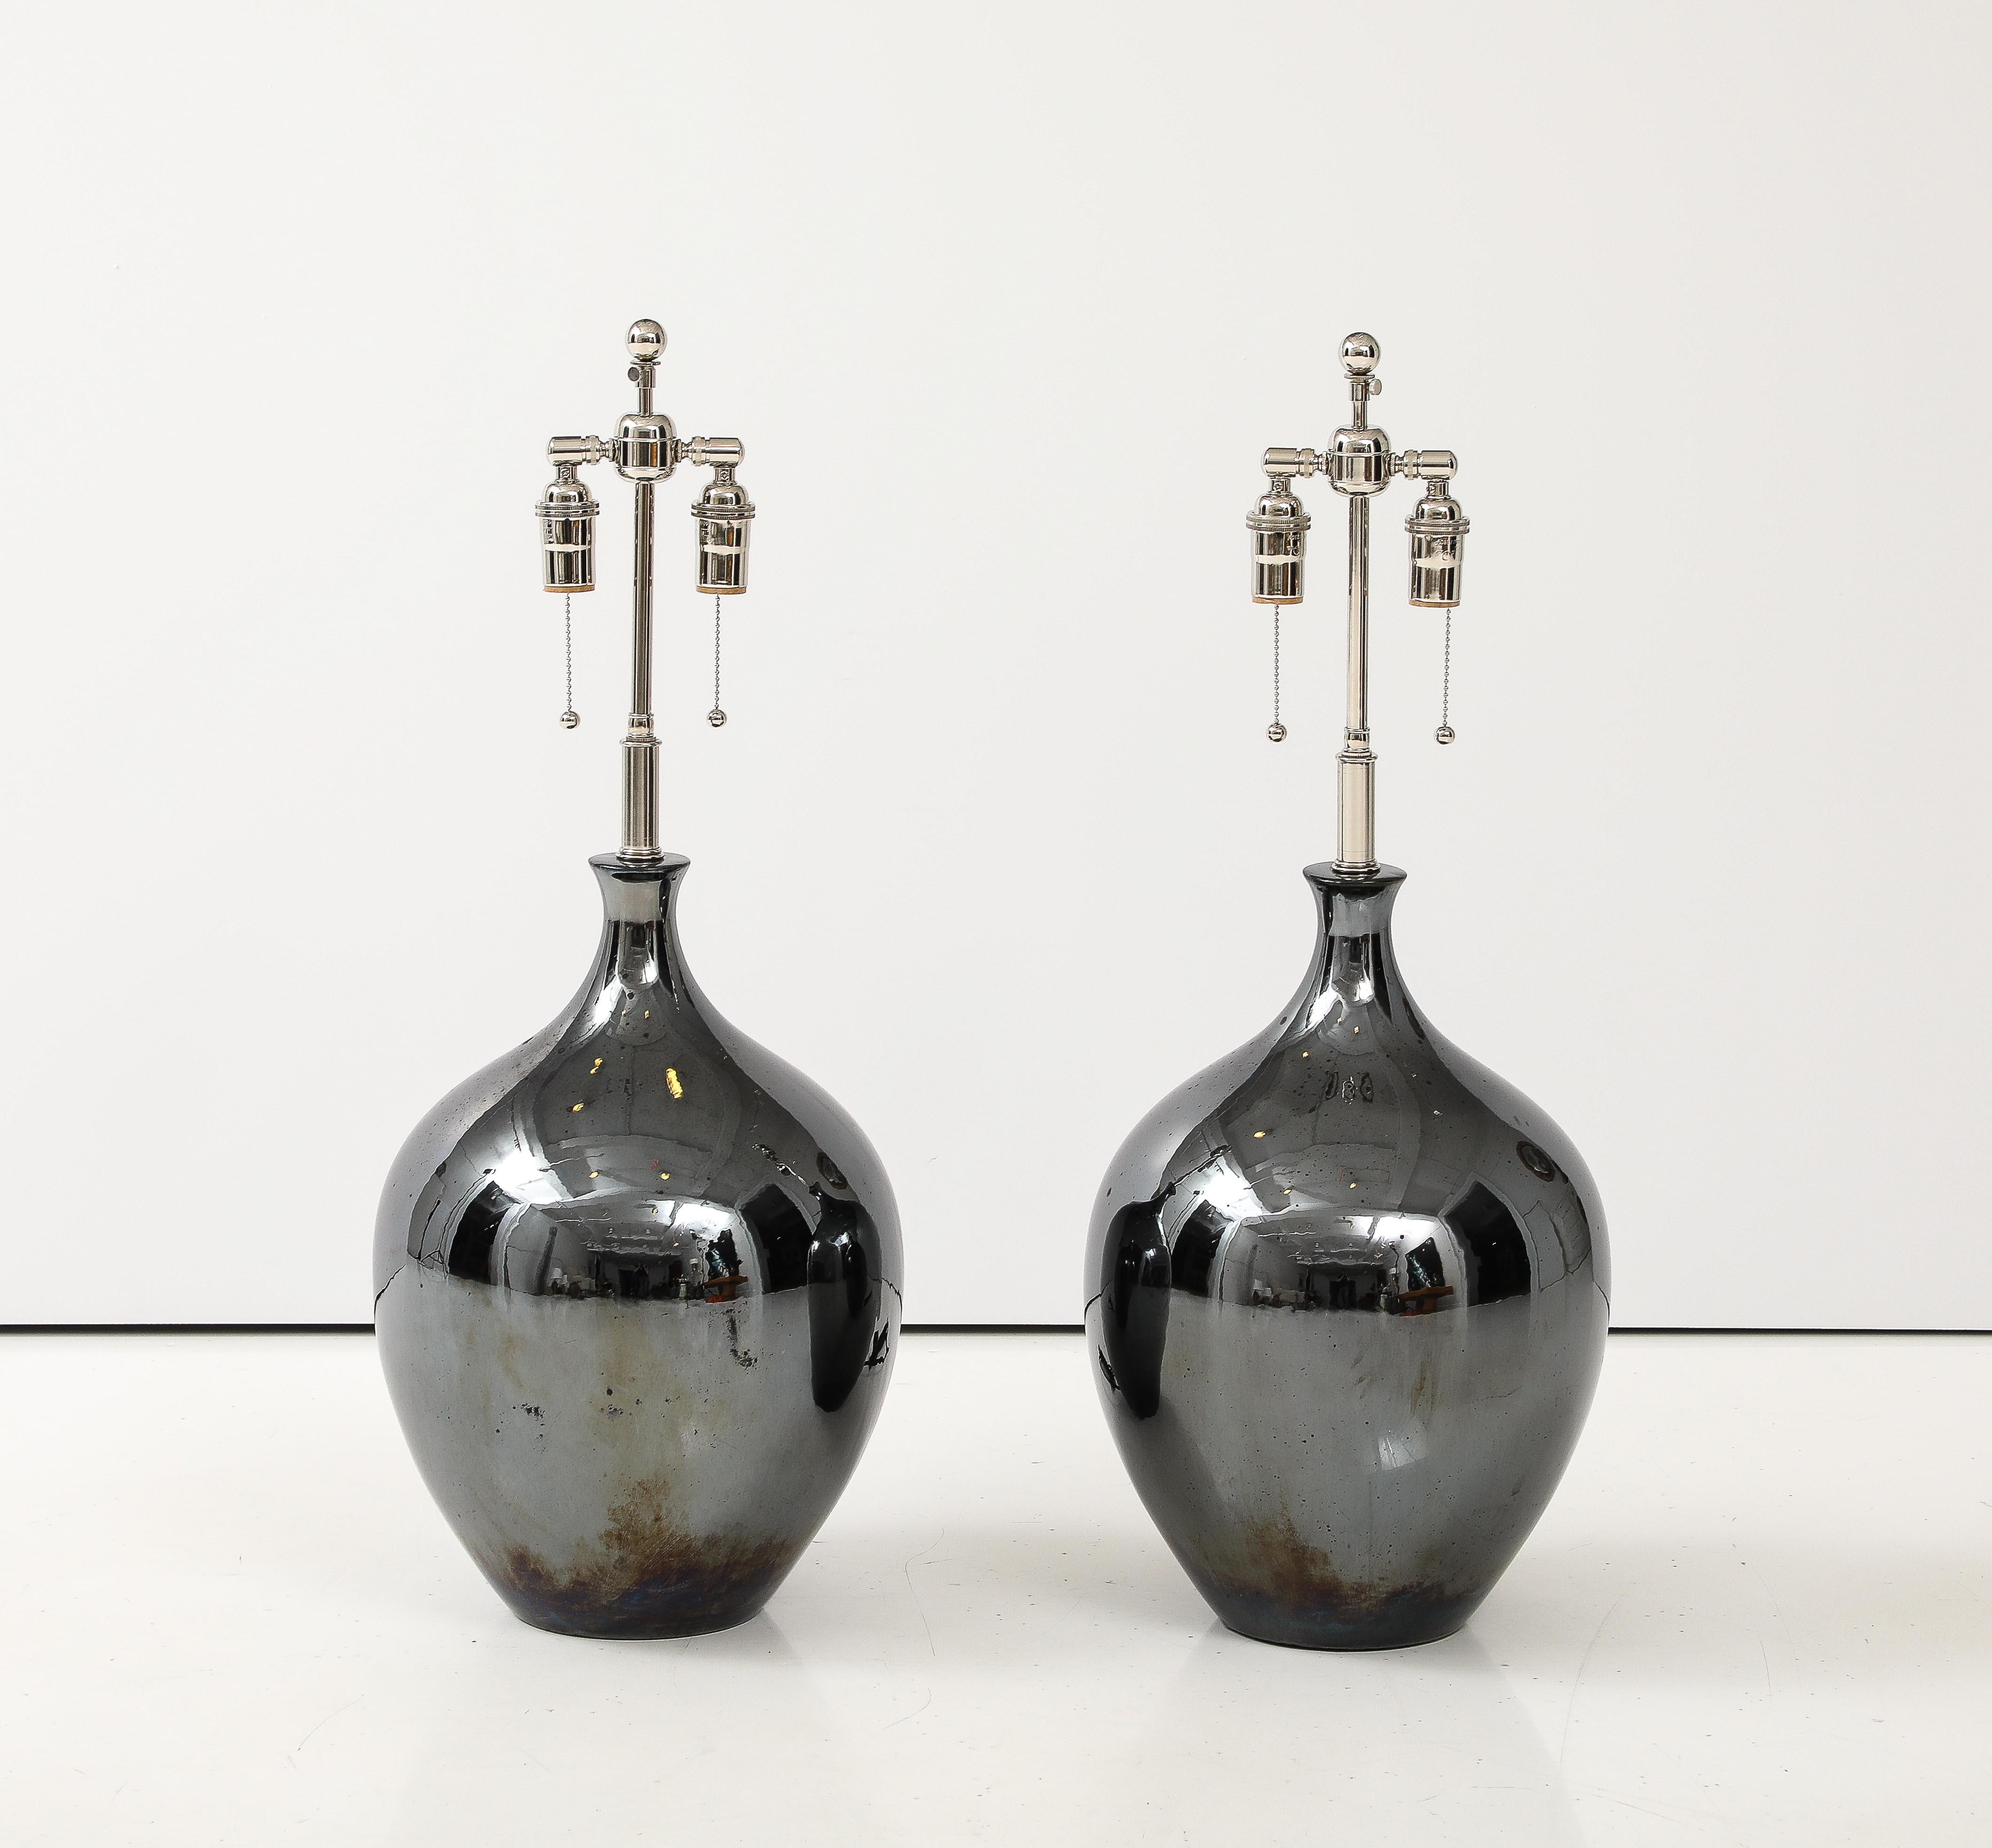 Wonderful pair of 1970's Black Nickel glazed ceramic lamps 
that have been Newly rewired with adjustable Nickel double clusters
that take standard size light bulbs and silk rayon cords.
